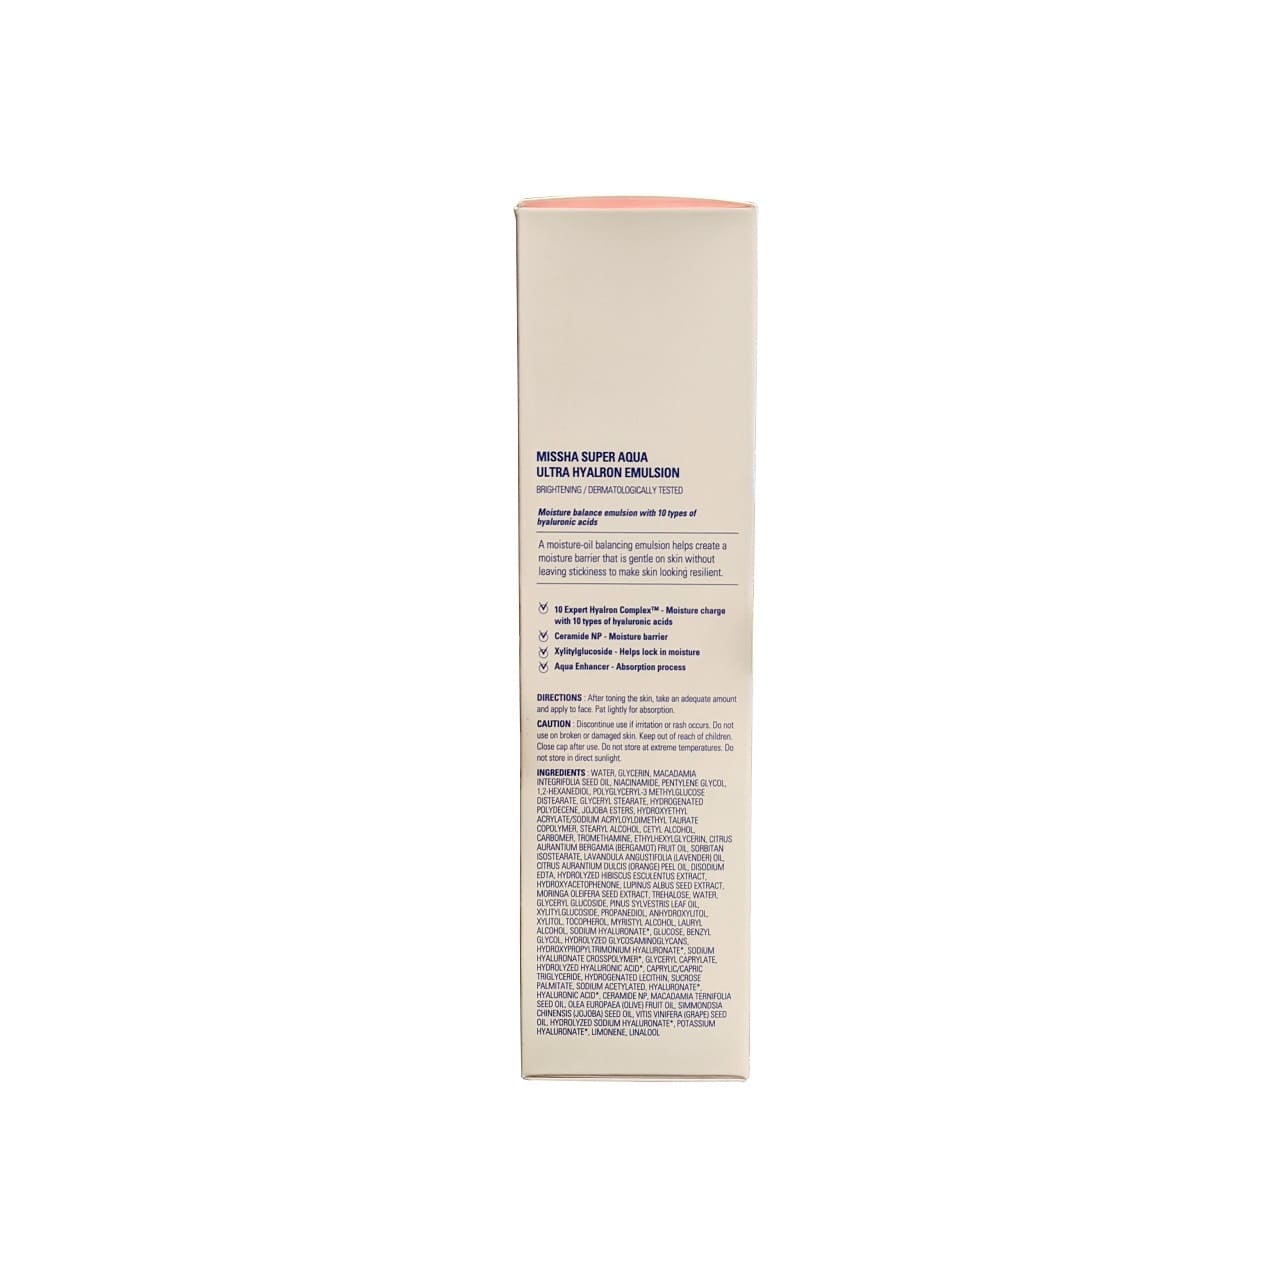 Direction, caution, and ingredients for MISSHA Super Aqua Ultra Hyalron Emulsion (130 mL) in English